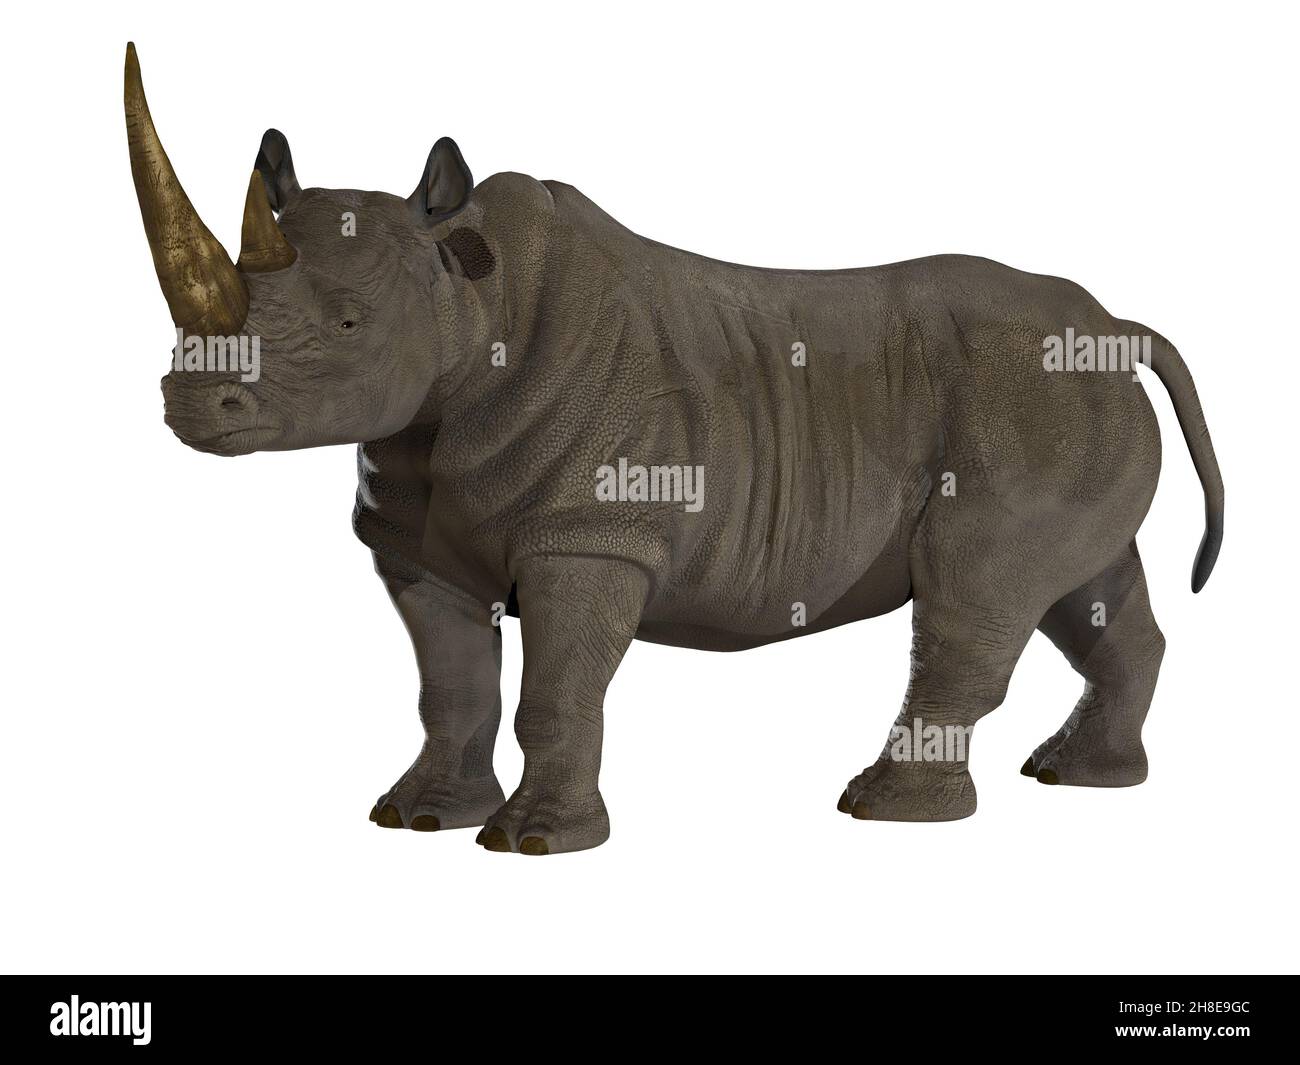 The Rhinoceros is a thick-skinned horned mammal that lives in Africa, India and Asia. Stock Photo